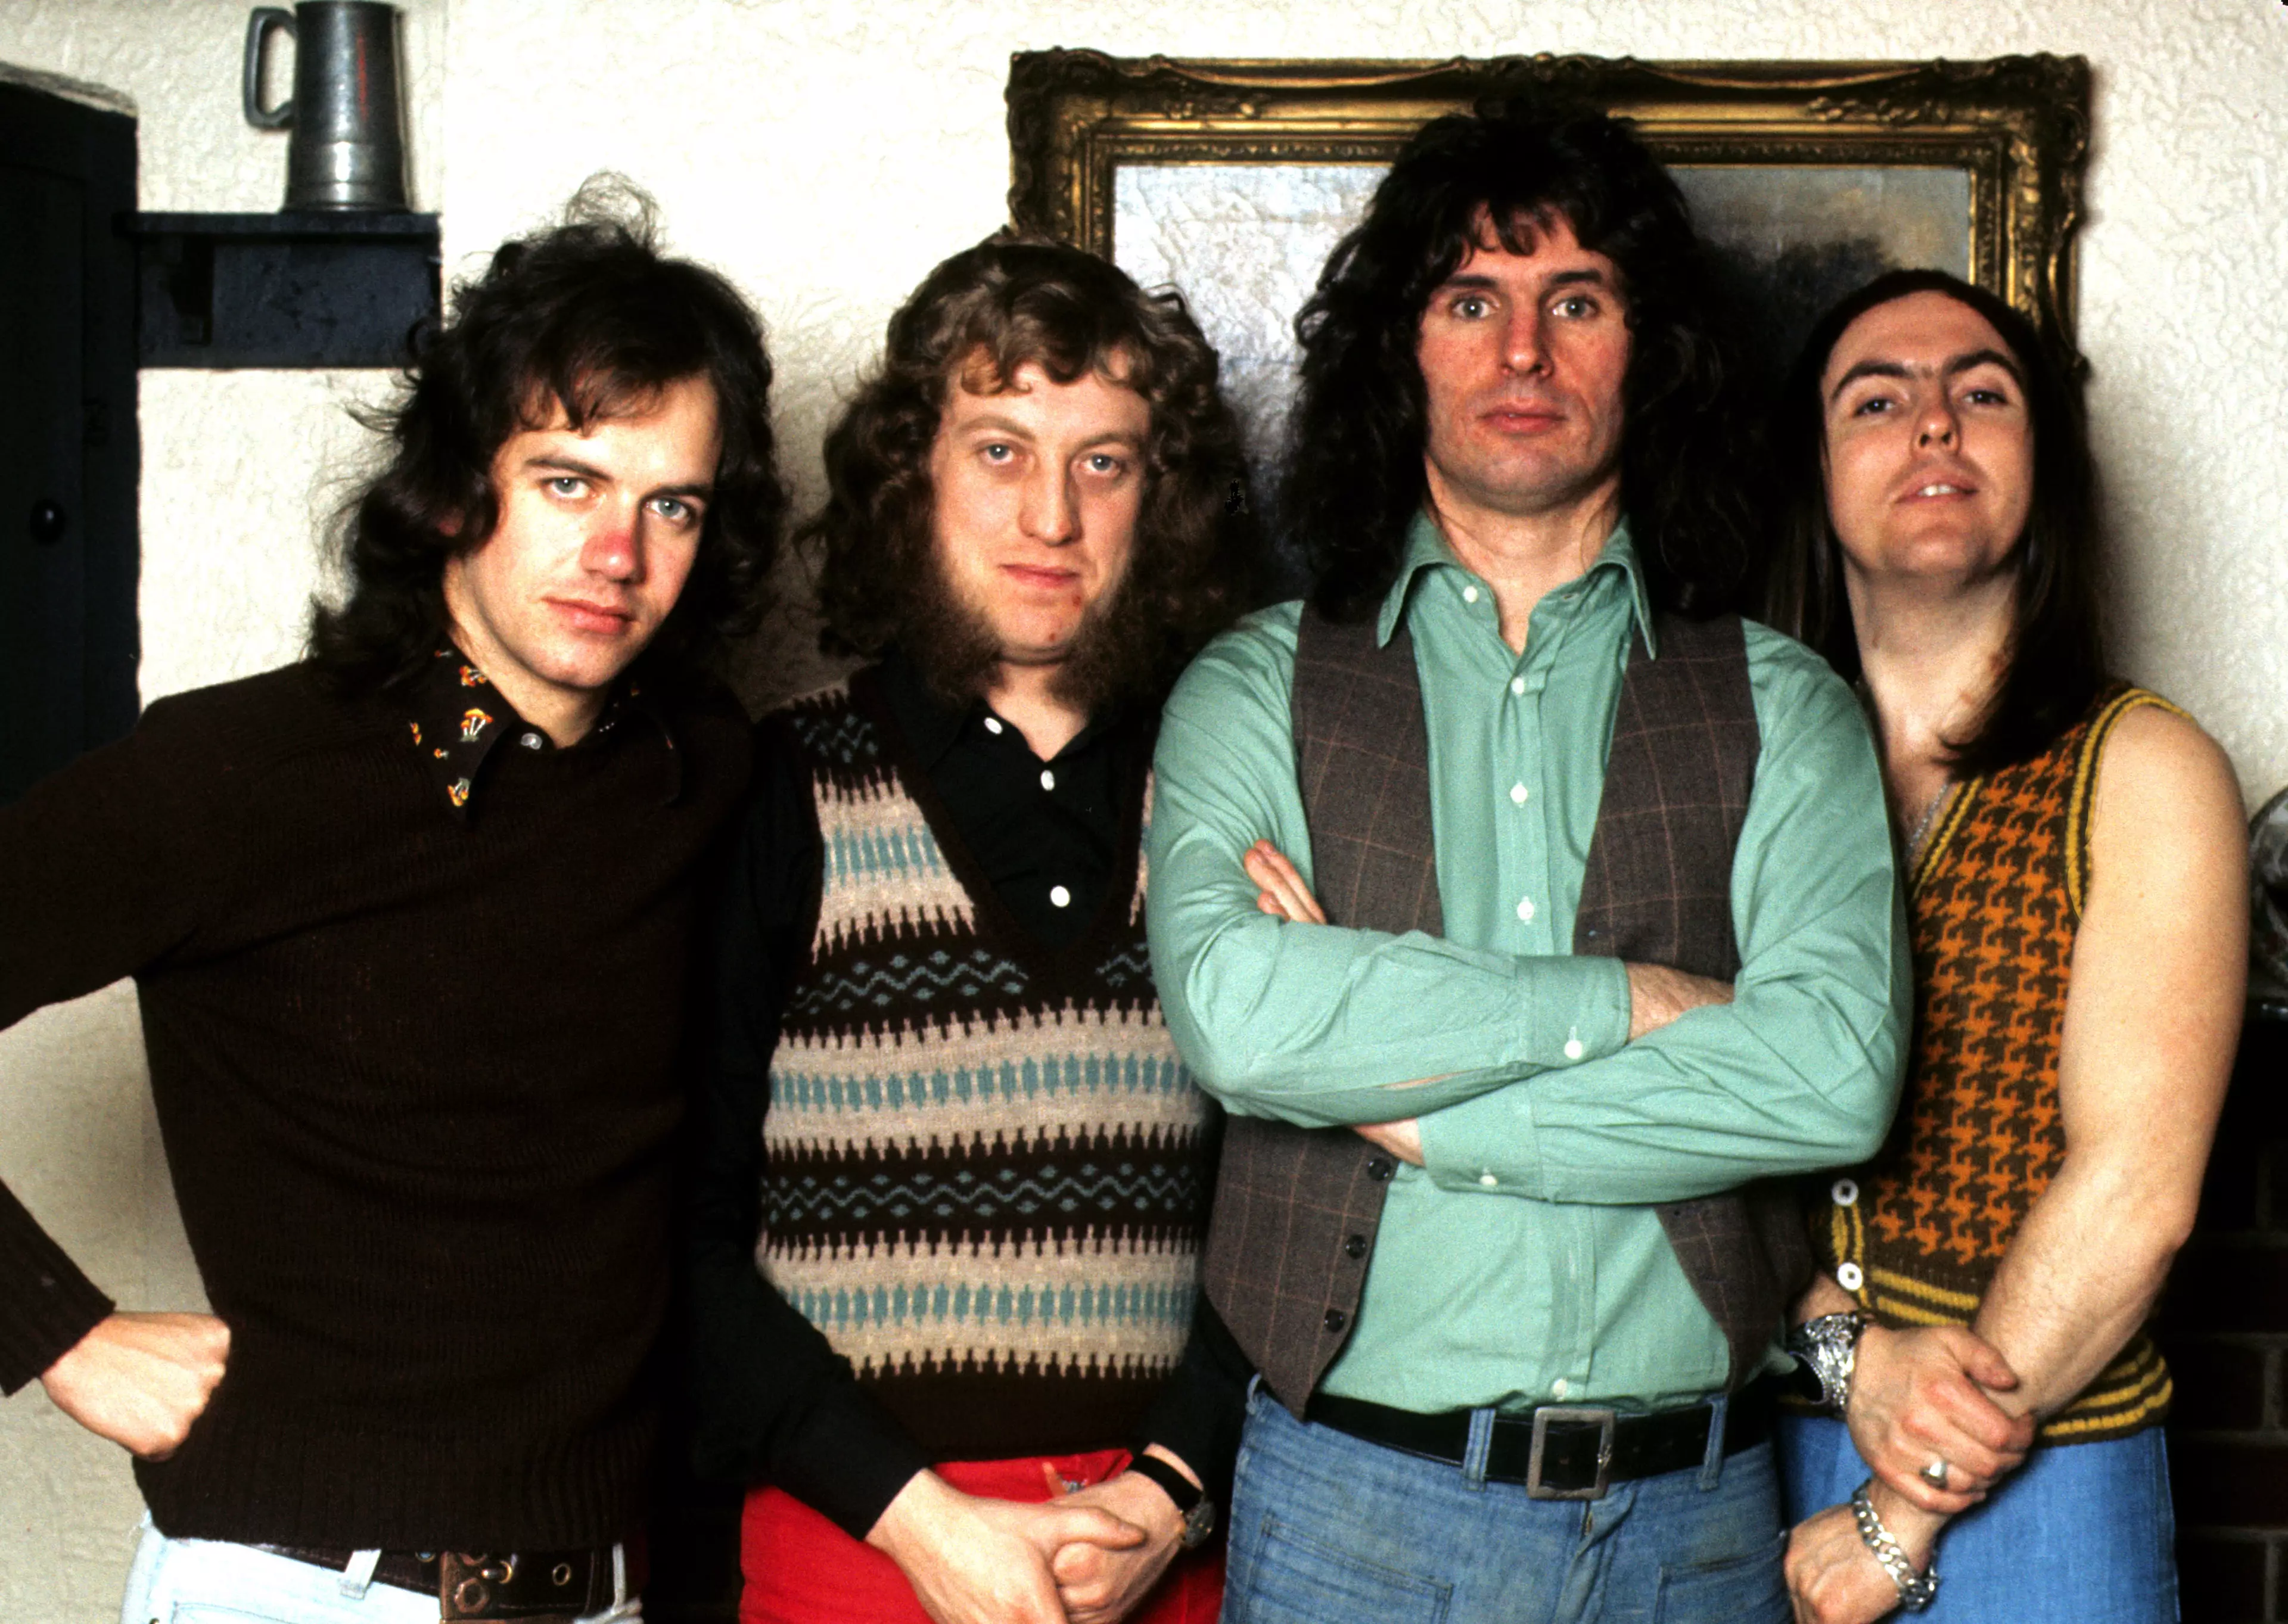 Slade continues to rake in the cash more than 40 years since their Christmas banger was released.